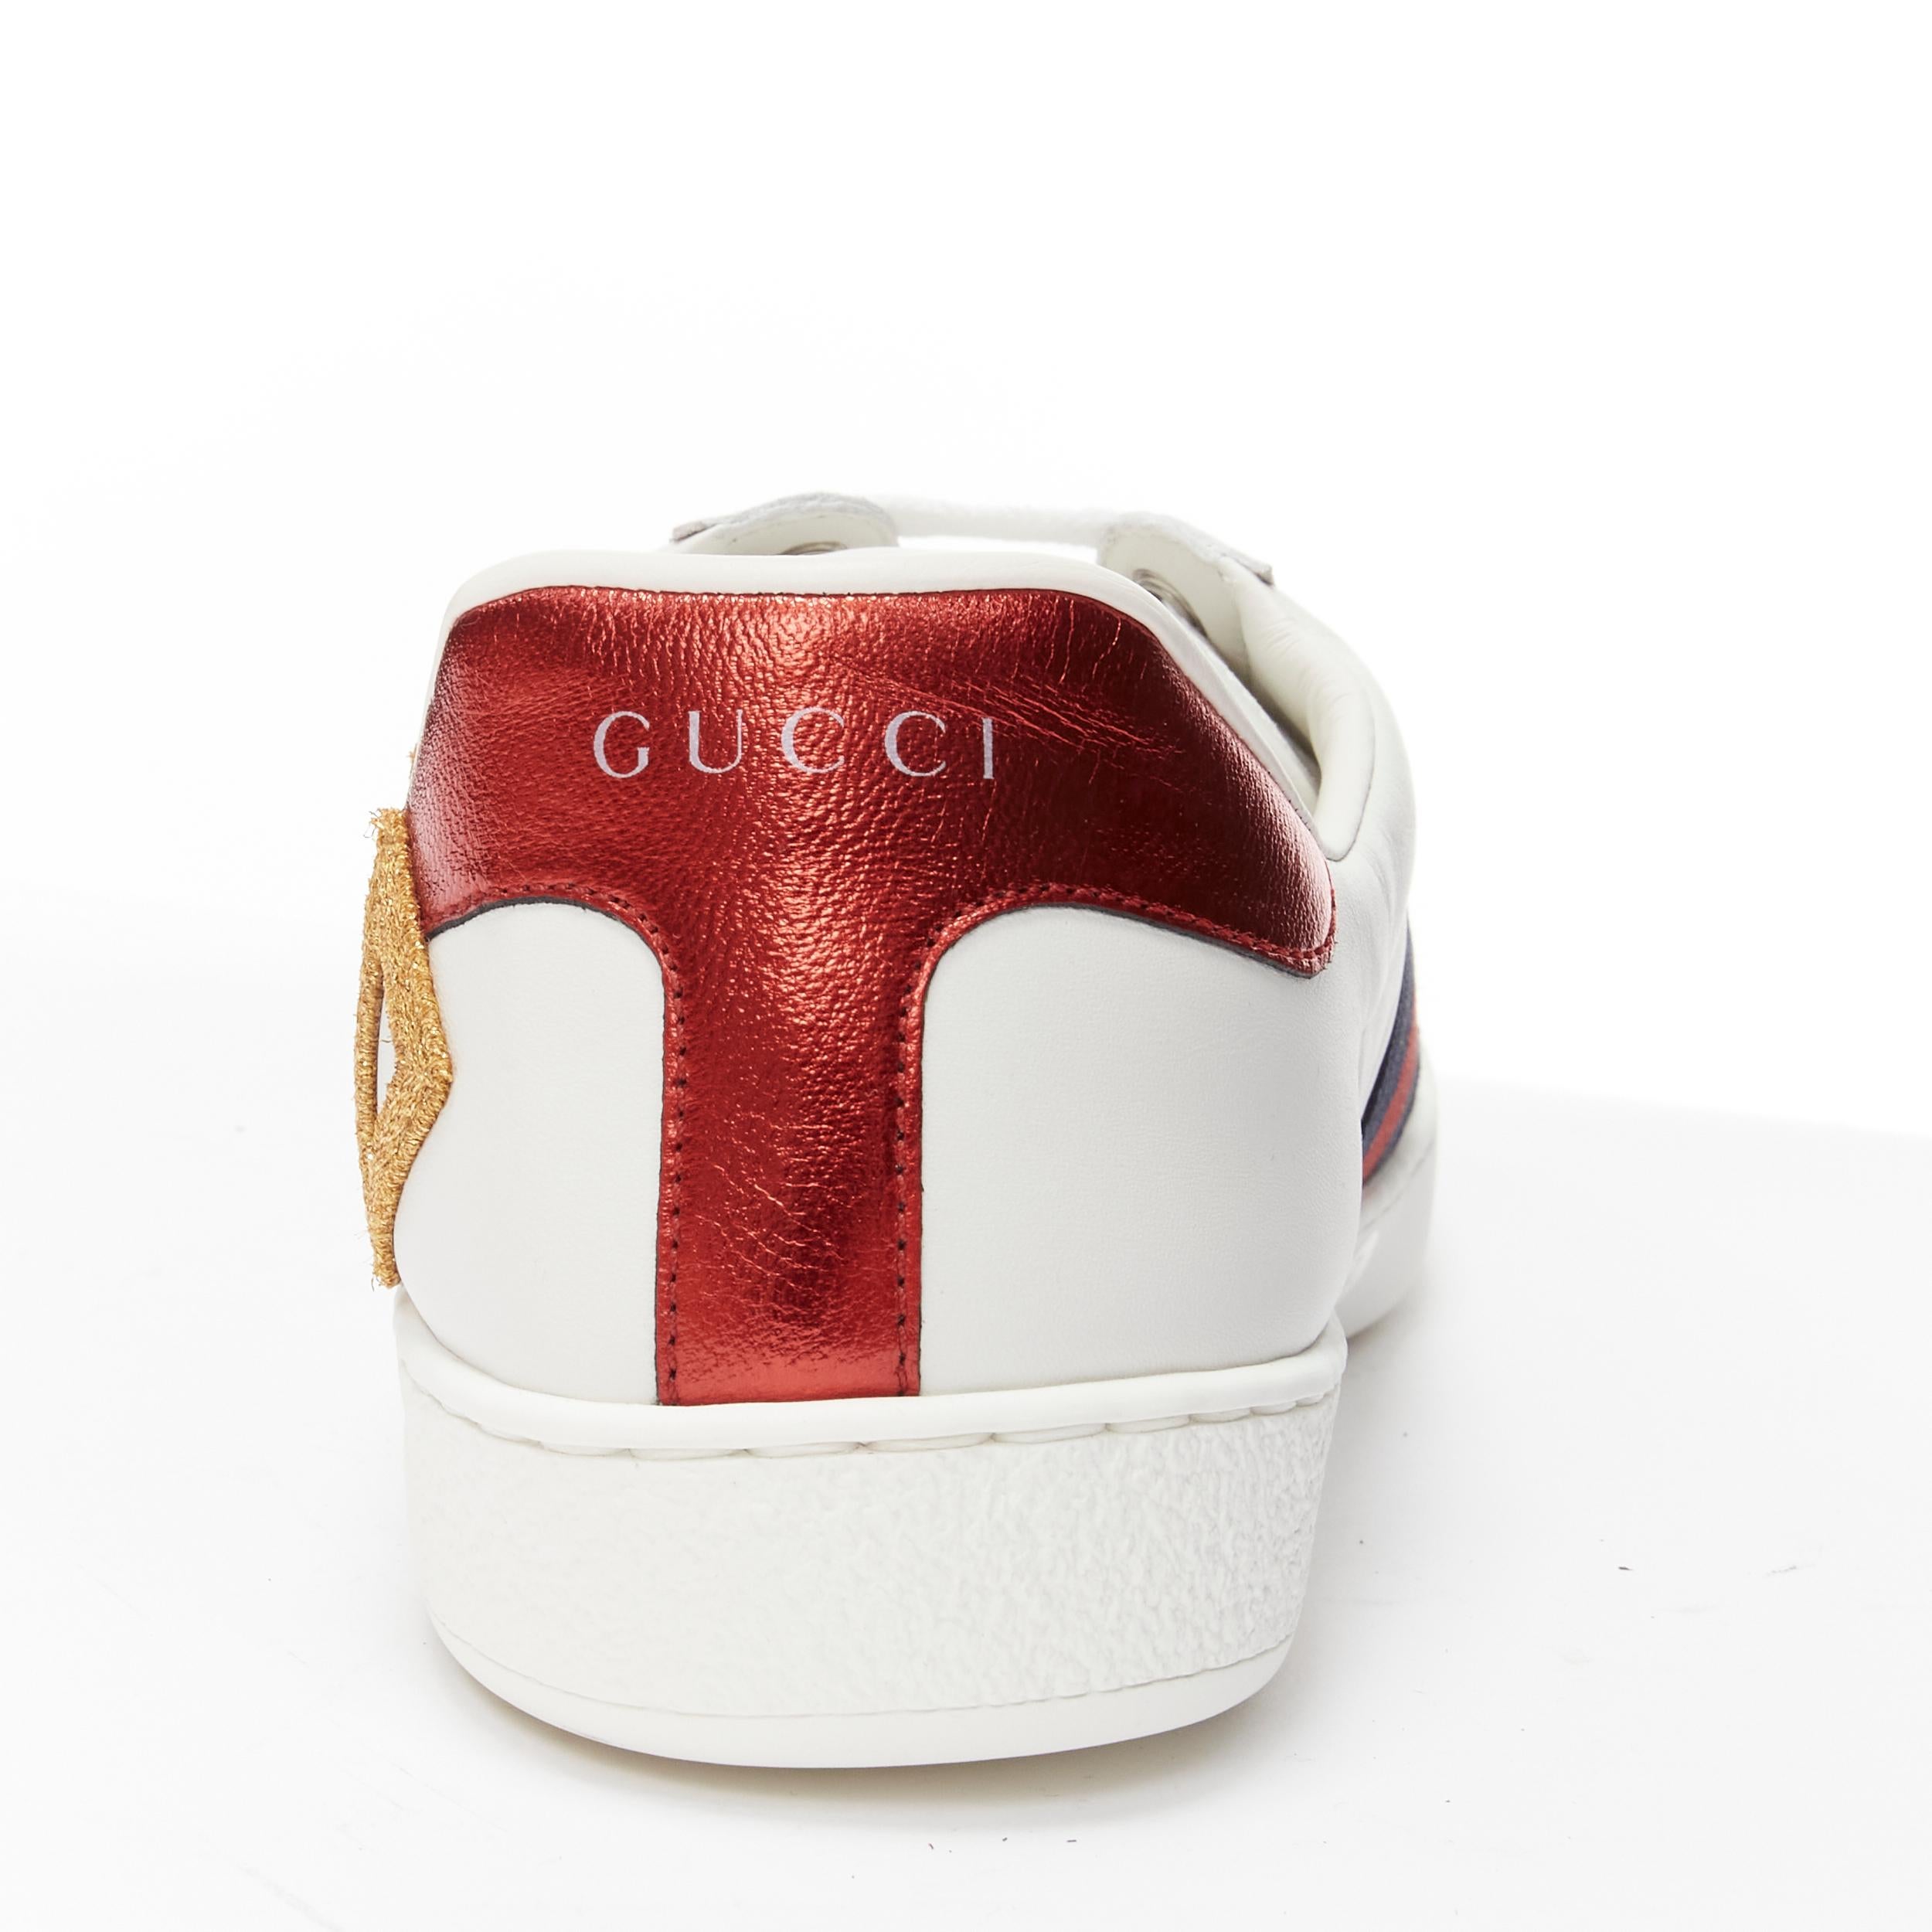 GUCCI Ace Loved gold embroidered blue red web leather sneakers UK7 EU41 For Sale 2